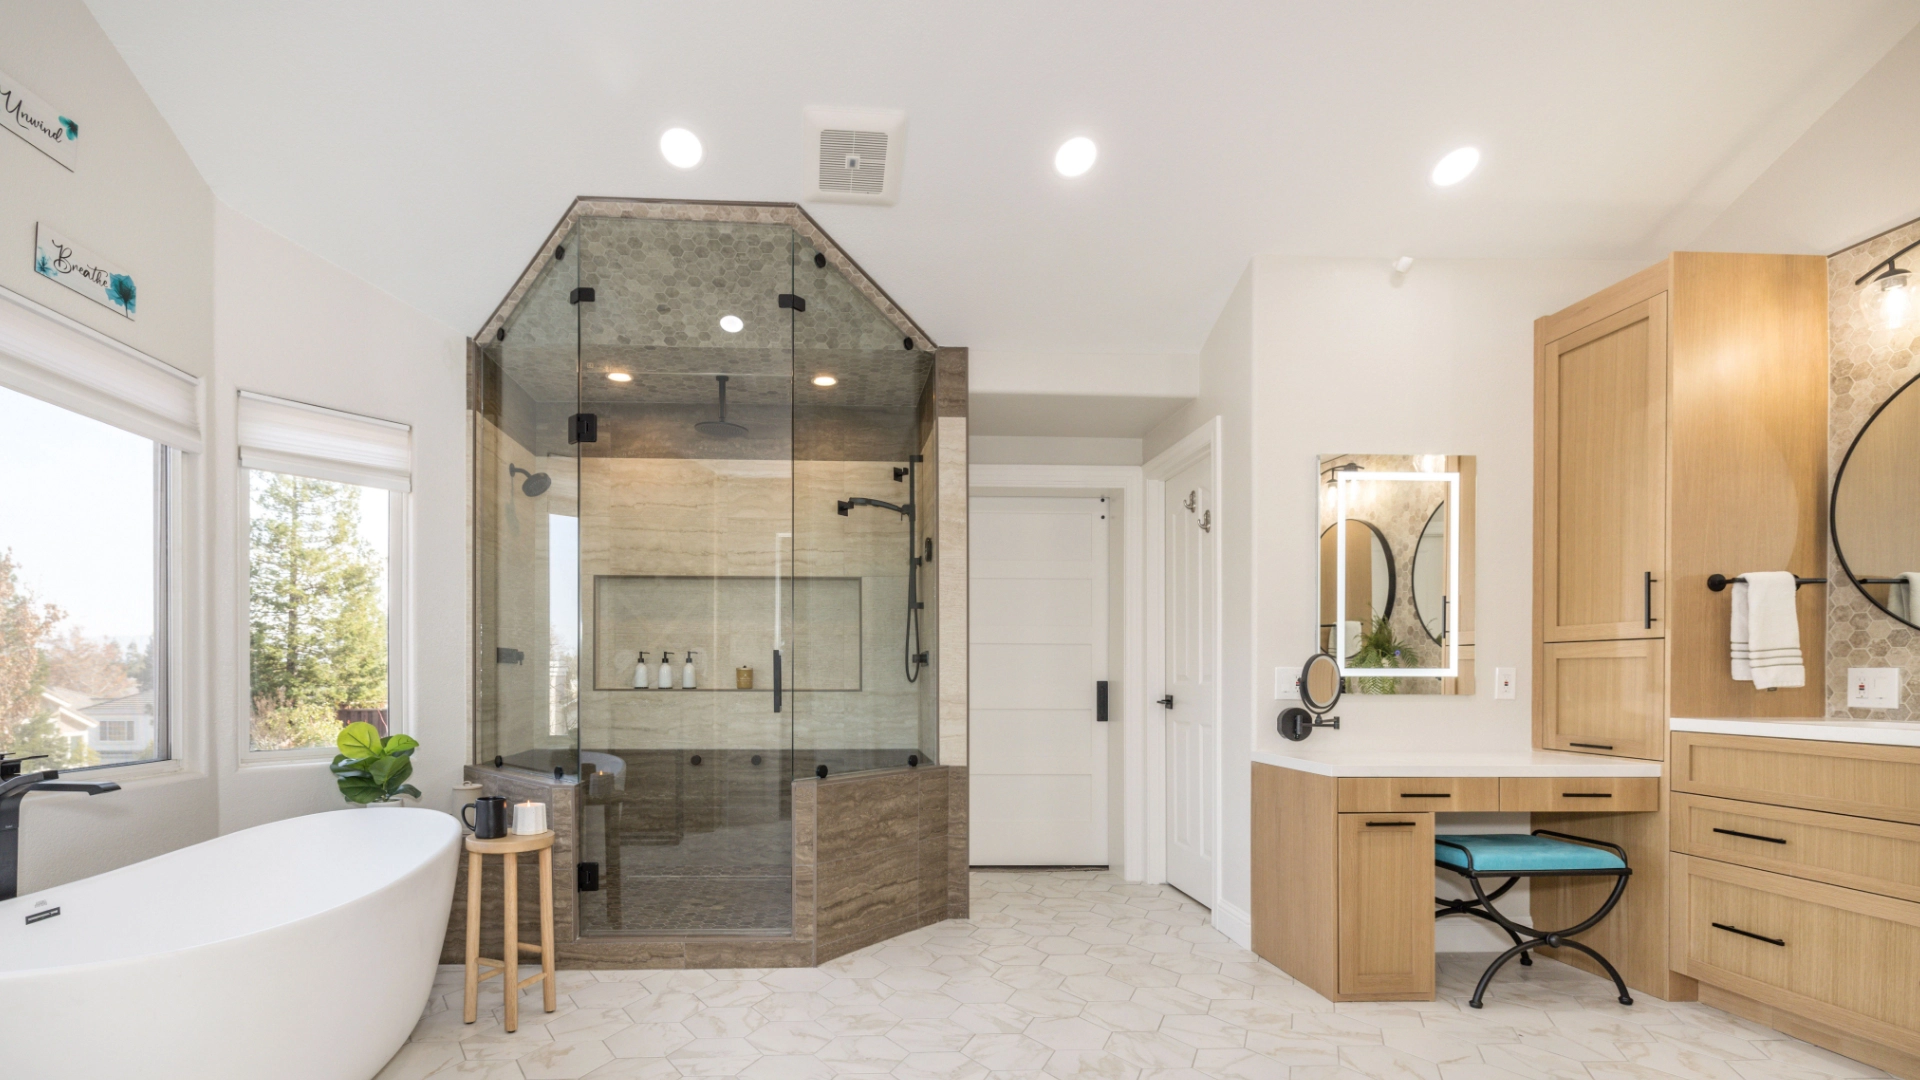 Modern bathroom with a glass-enclosed shower, freestanding bathtub, vanity with mirrors, and light wooden cabinetry.